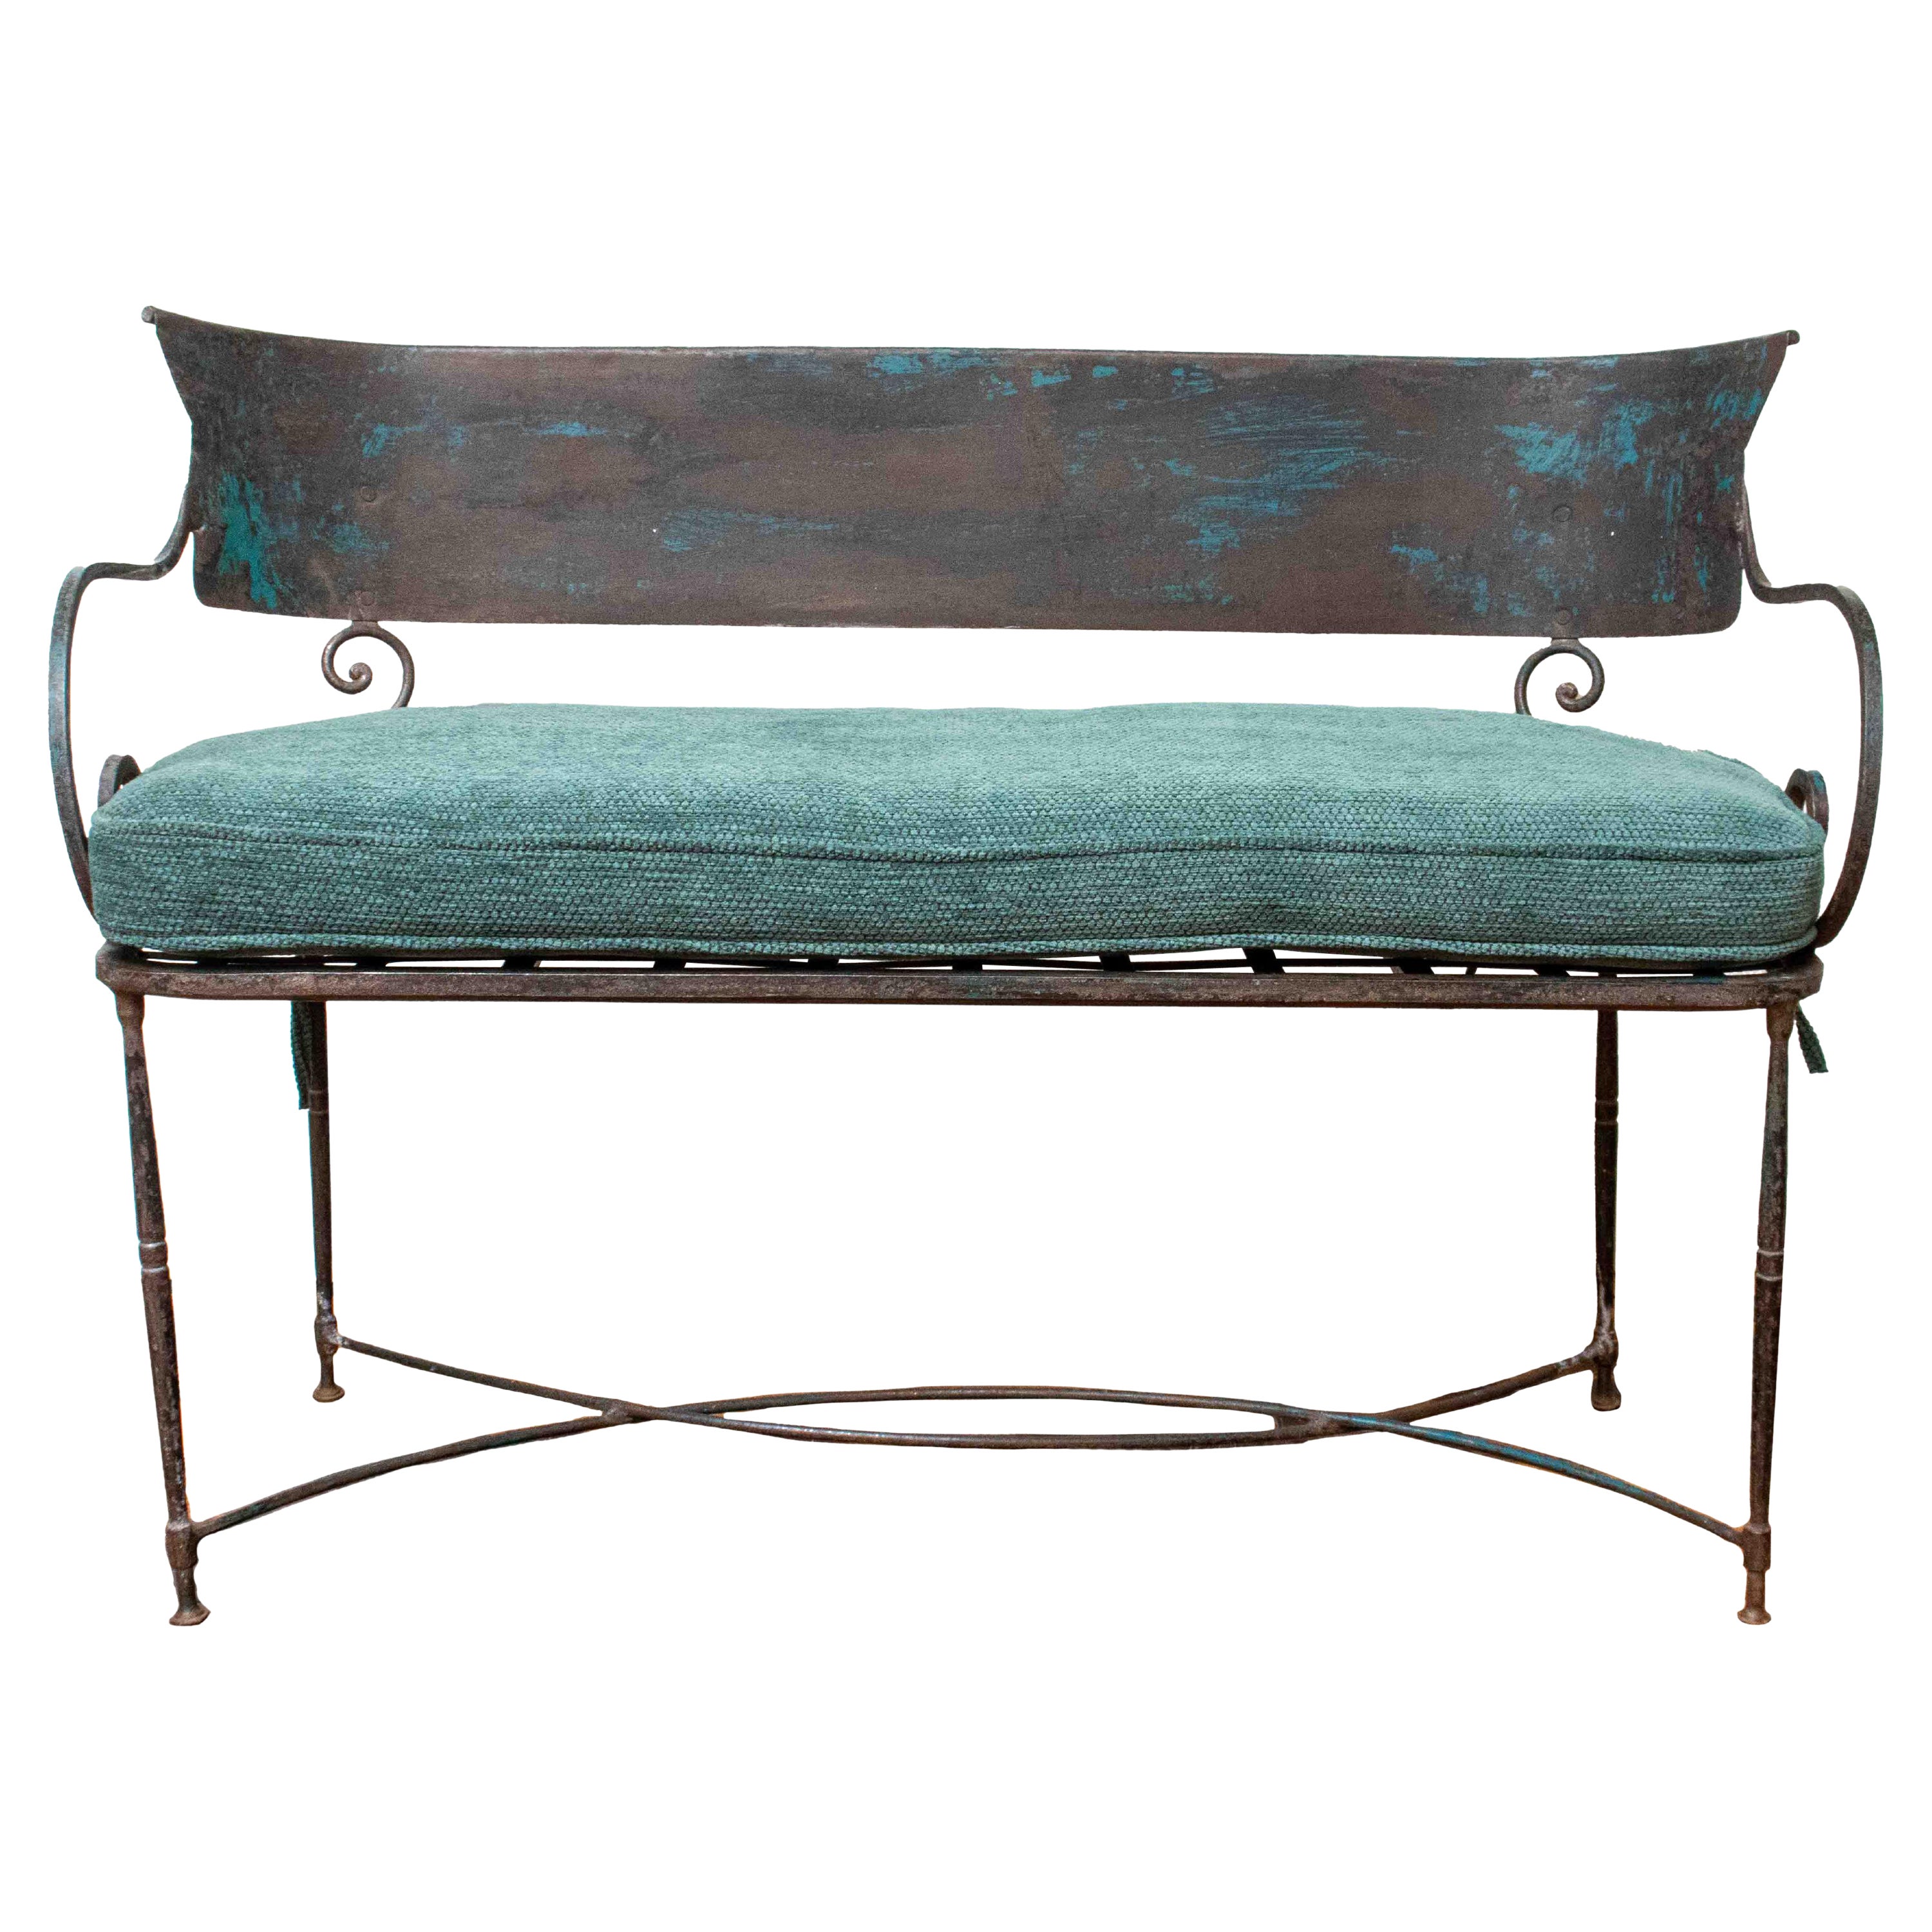 Early 20th Century Hand Wrought Iron French Garden Settee with Chenille Cushion